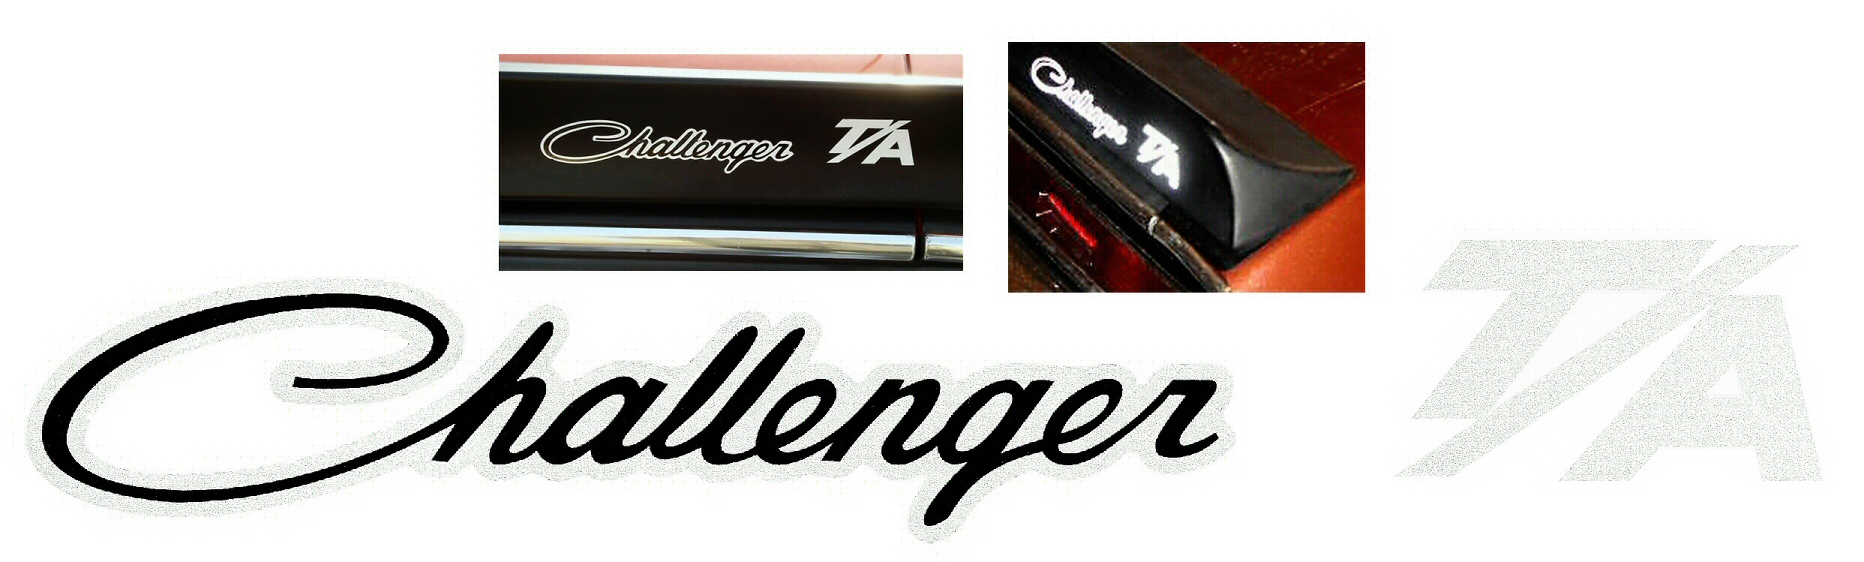 1970 Dodge "Challenger T/A" Rear Spoiler Lettering Decal